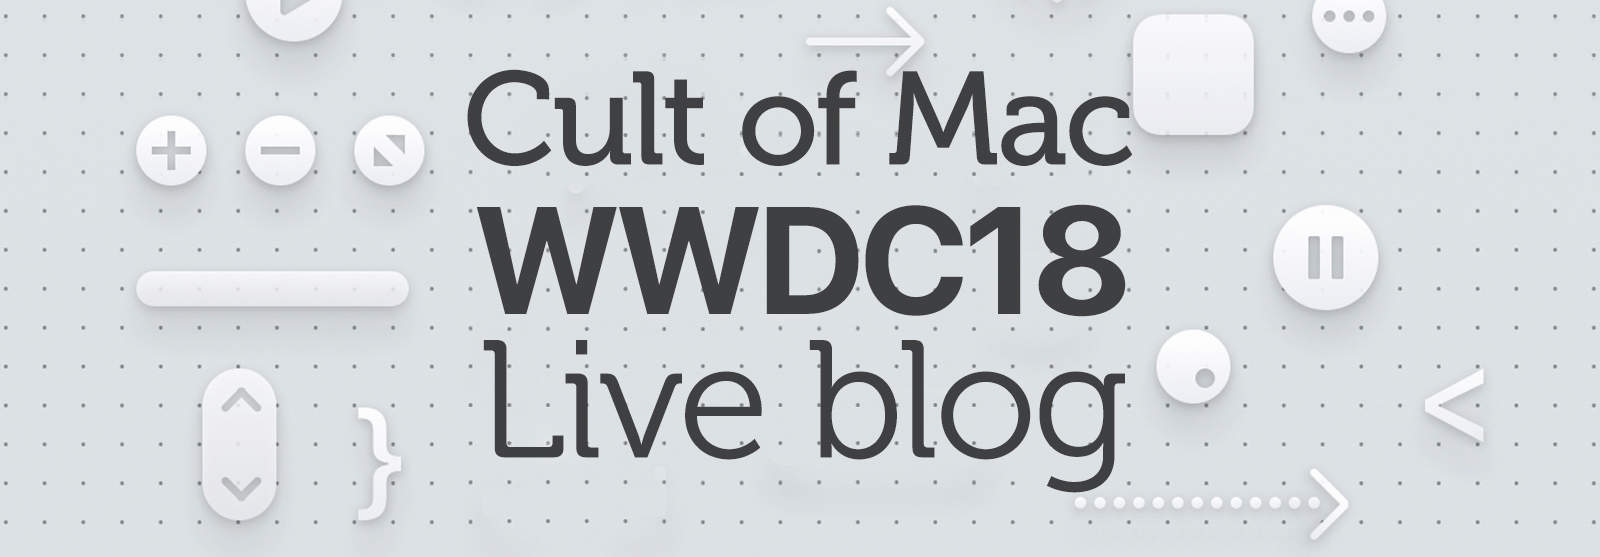 Get in on all the Apple action with our WWDC 2018 live blog.